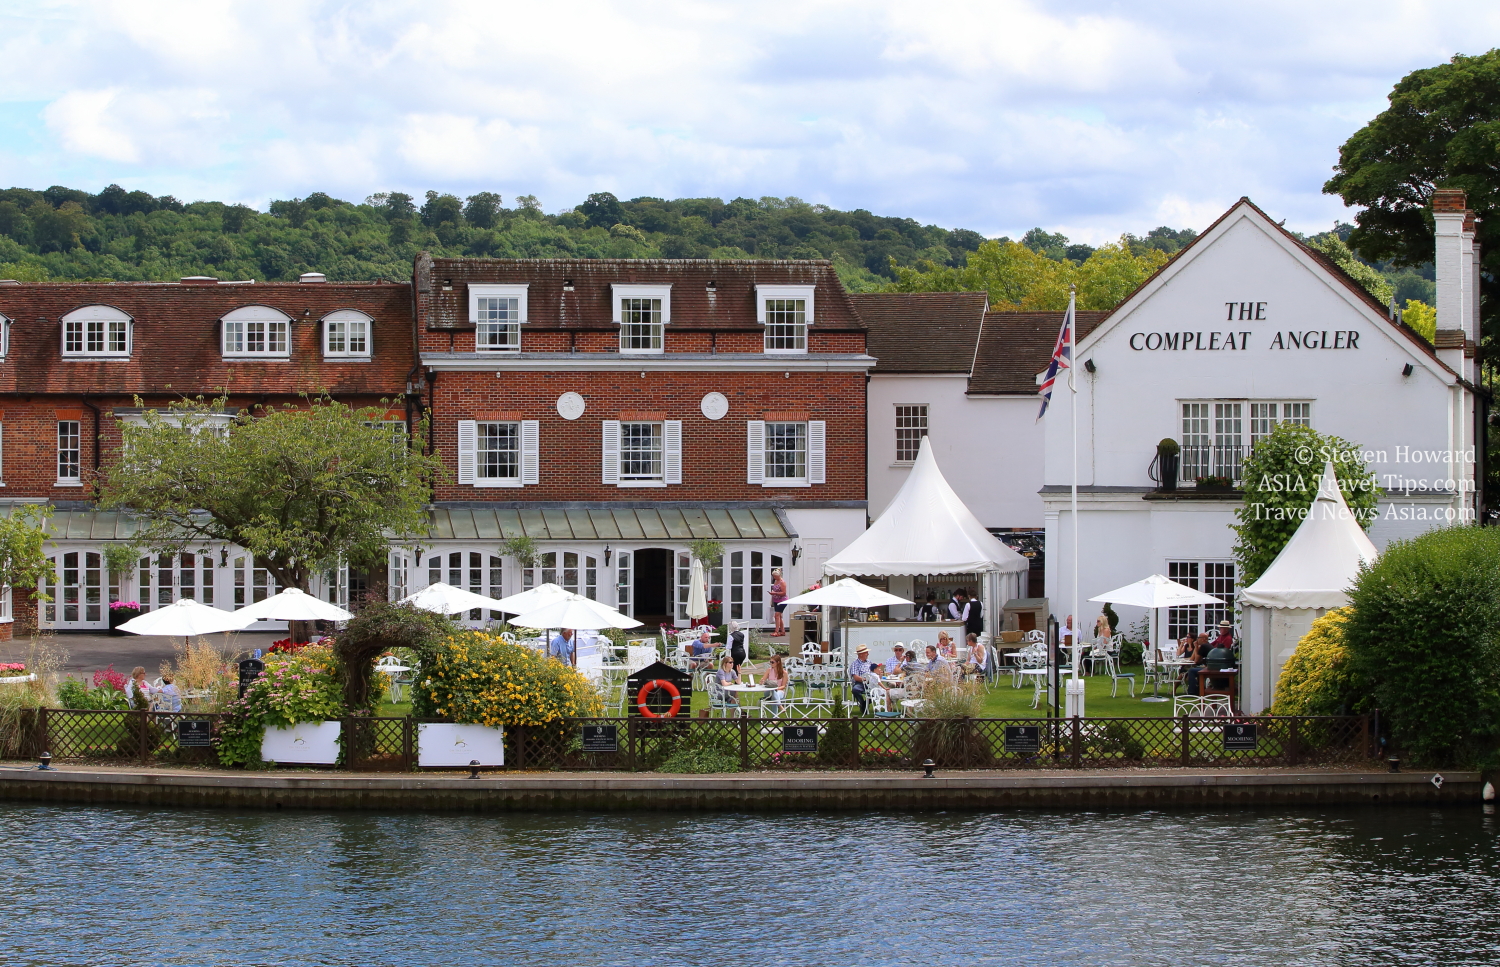 The Compleat Angler luxury hotel in Marlow, England. Click to enlarge.